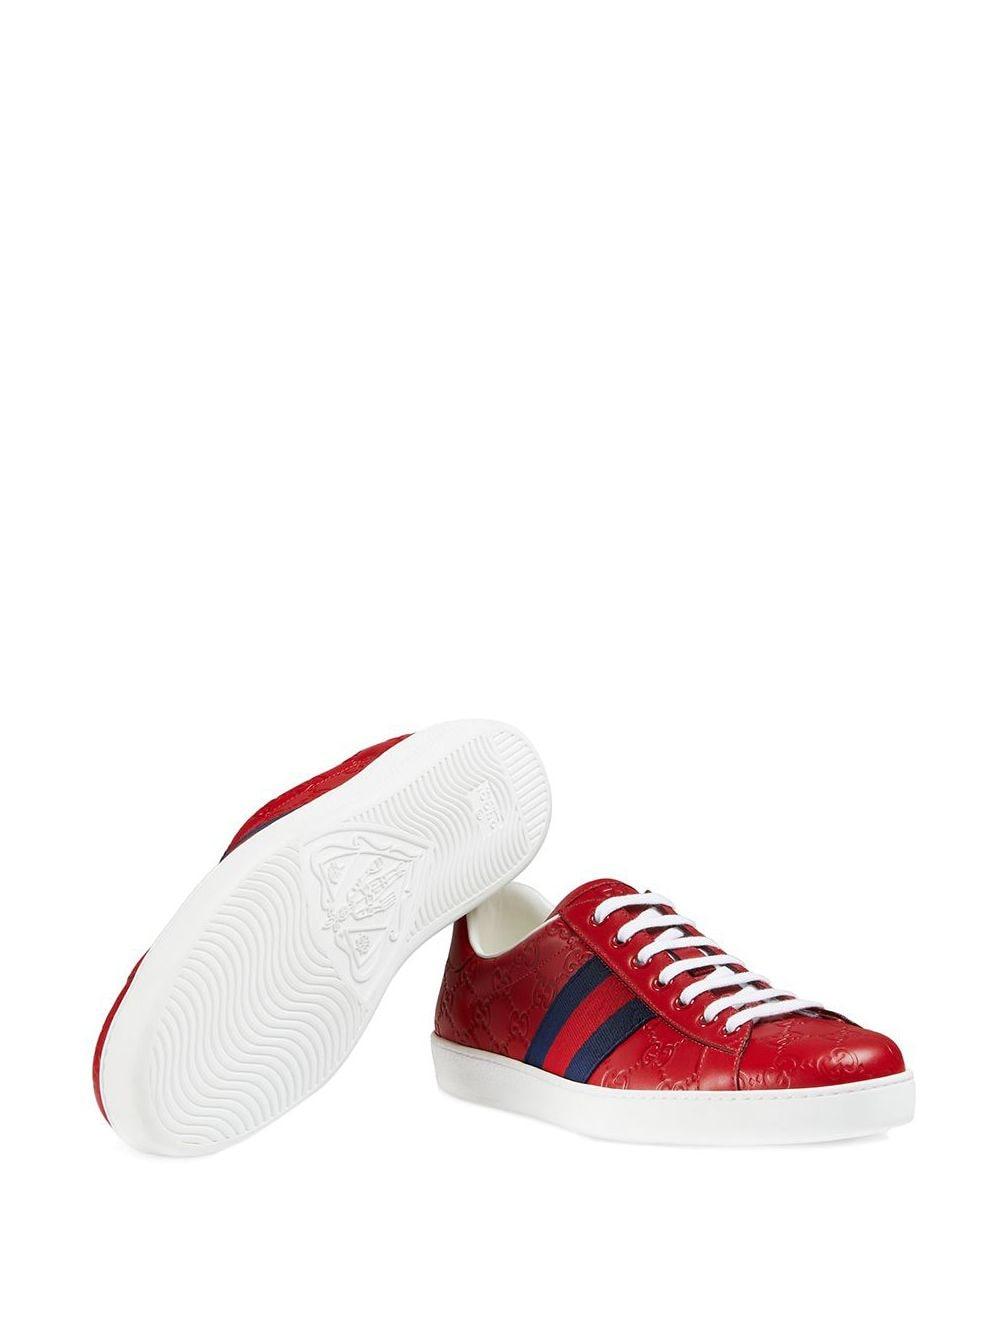 Gucci Ace Signature Sneaker in Red for | Lyst